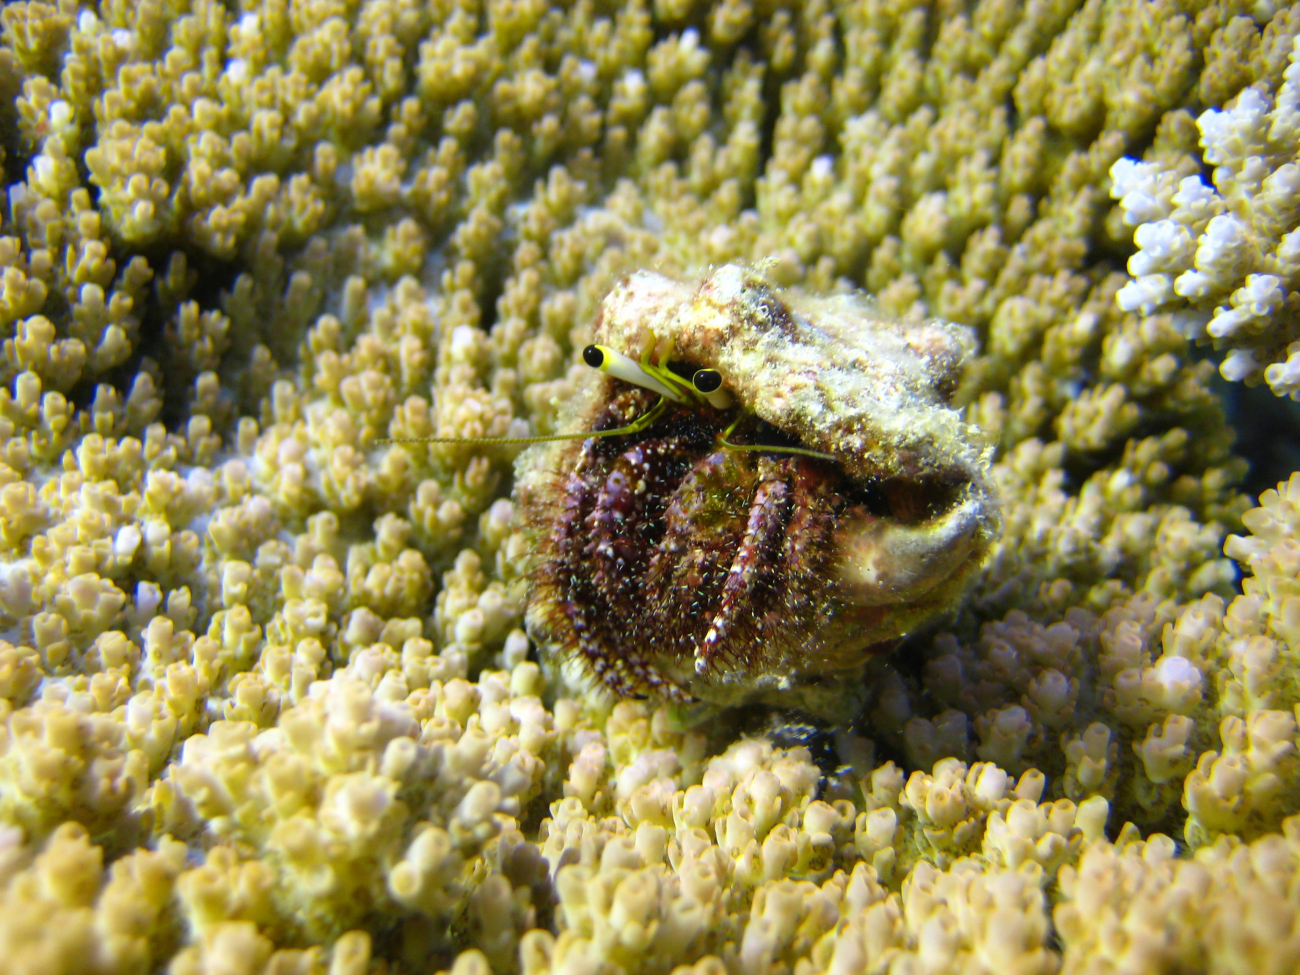 Stalked eyes of hermit crab peering out from shell